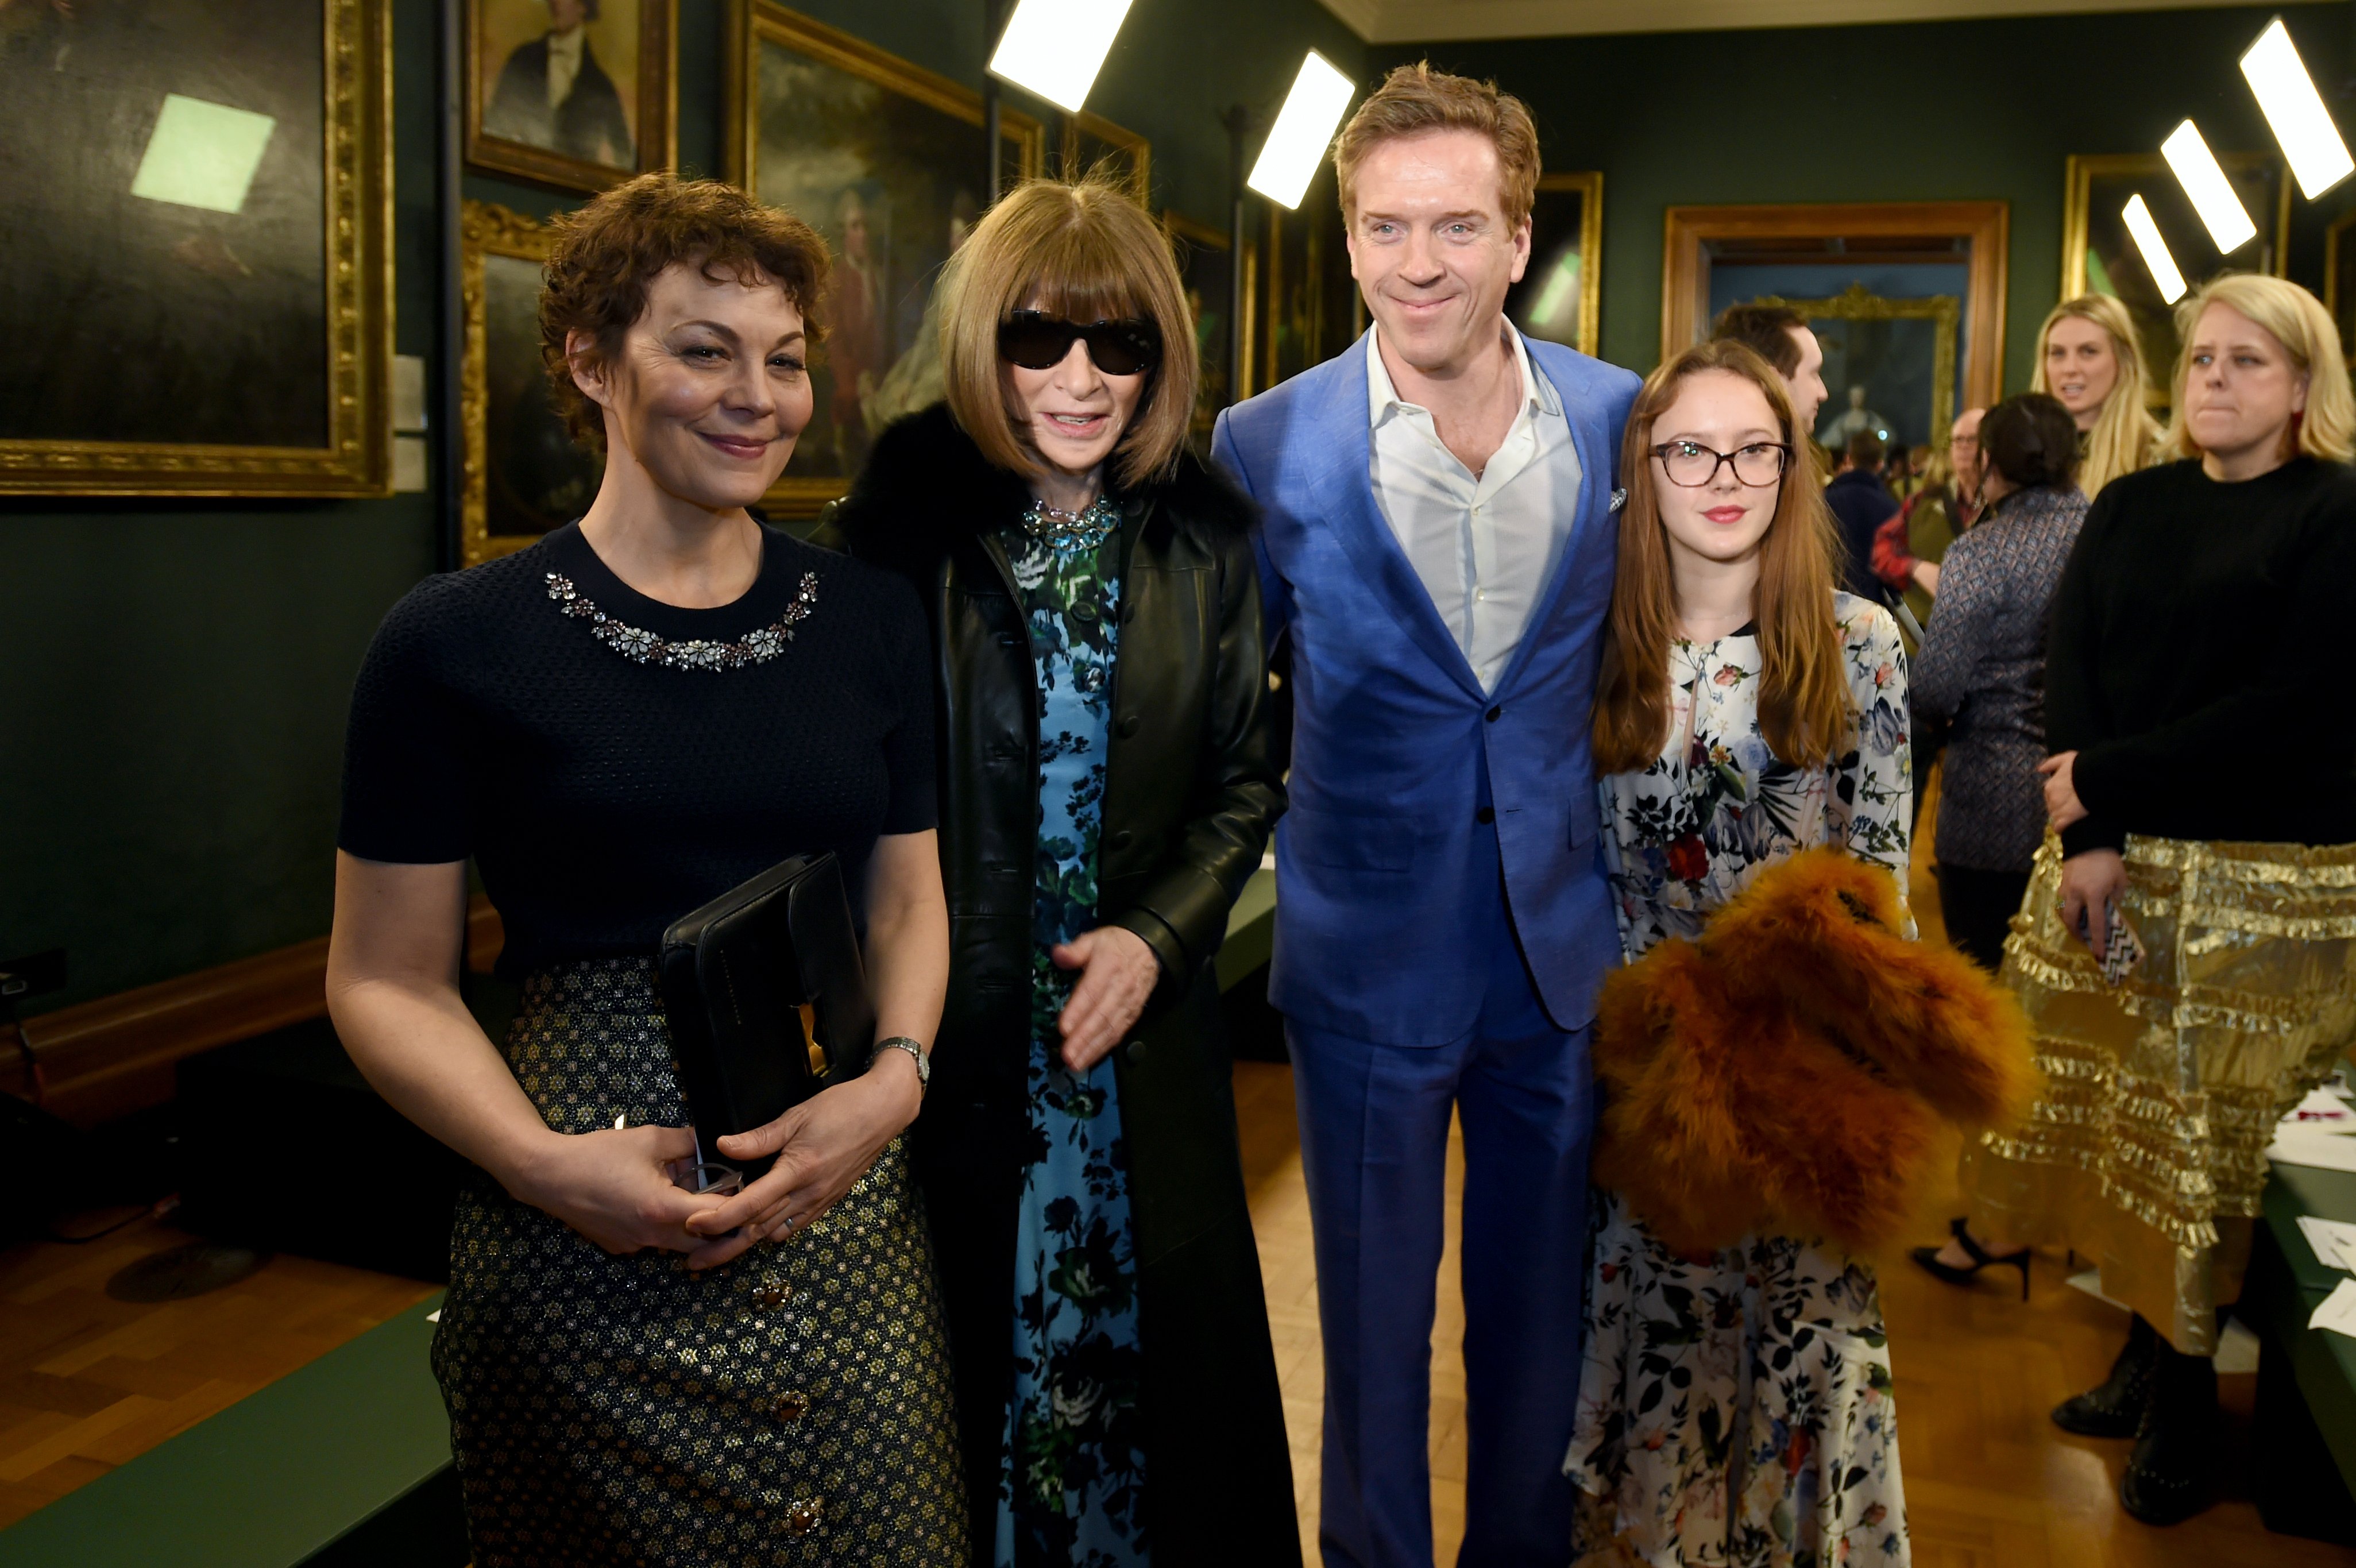 Helen McCrory, Dame Anna Wintour and Damian Lewis attend the Erdem show during London Fashion Week at the National Portrait Gallery on February 18, 2019, in London, England. | Source: Getty Images